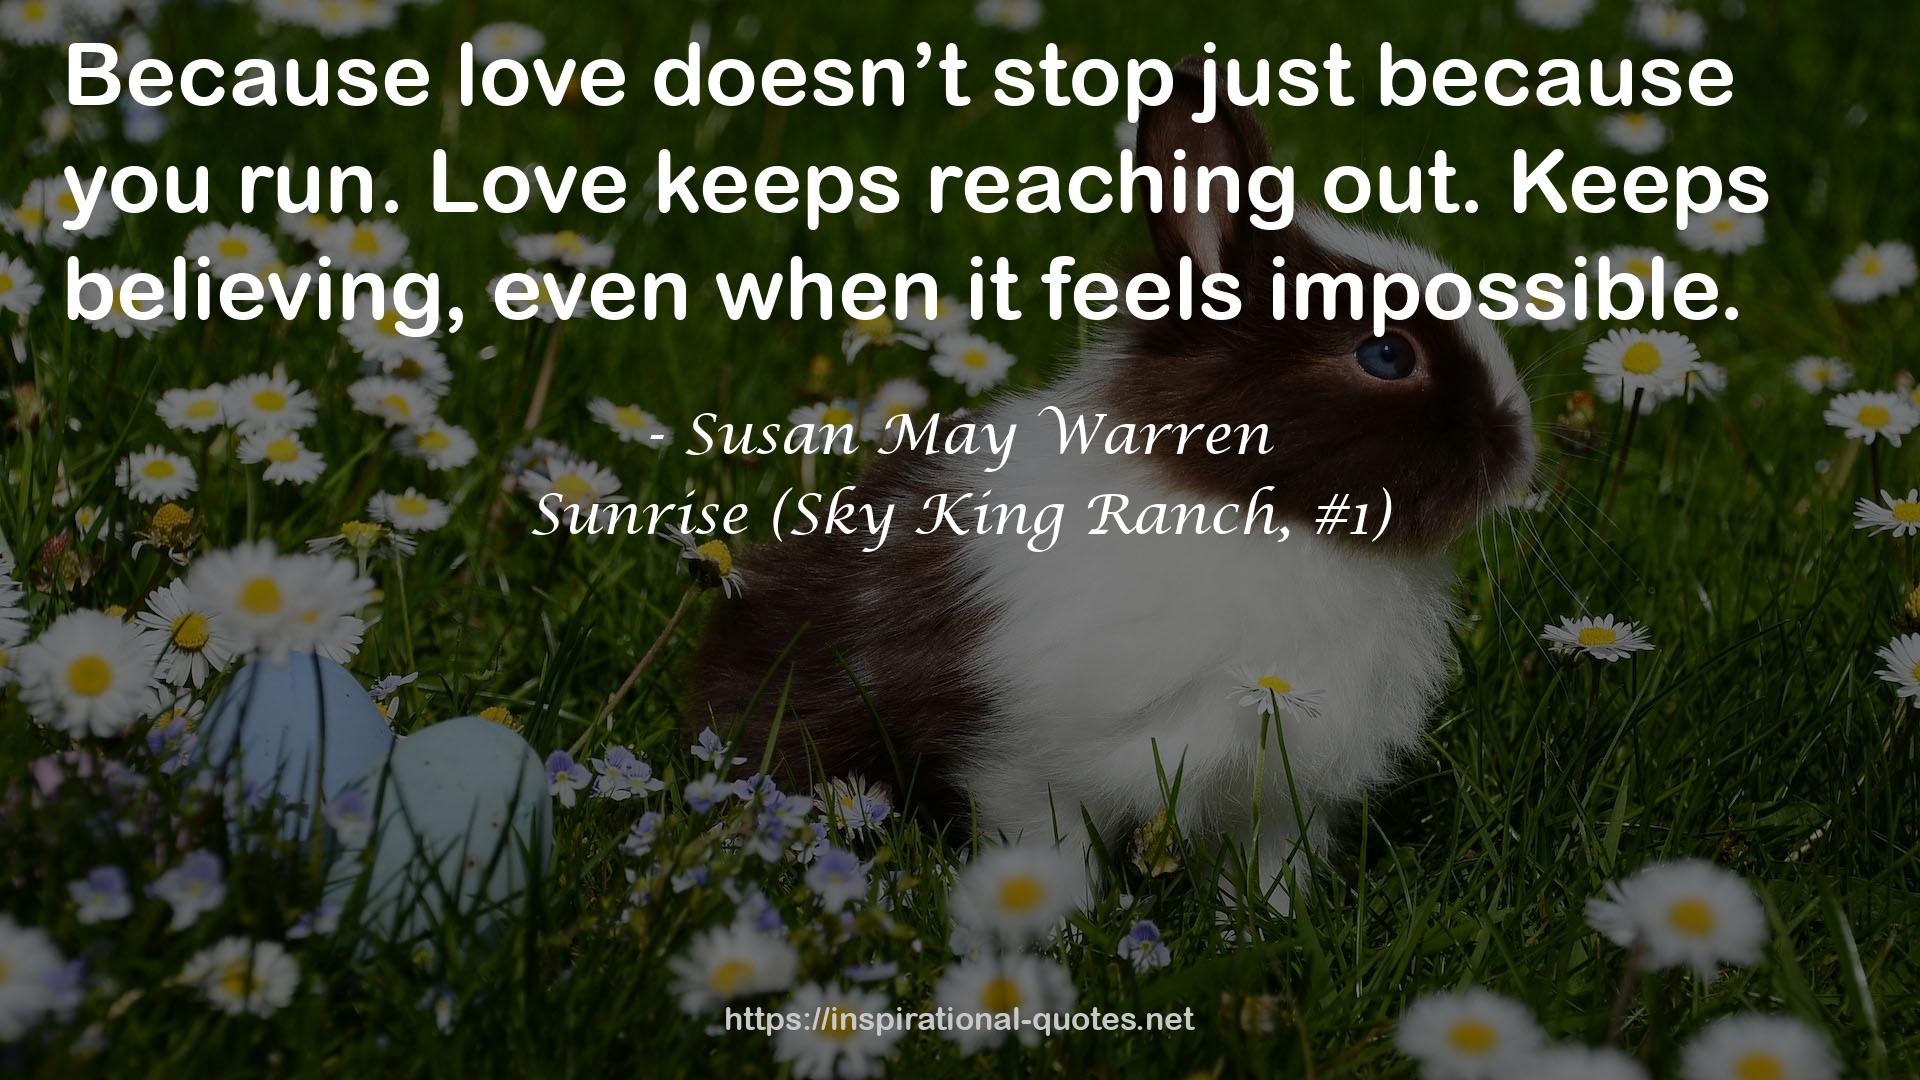 Sunrise (Sky King Ranch, #1) QUOTES